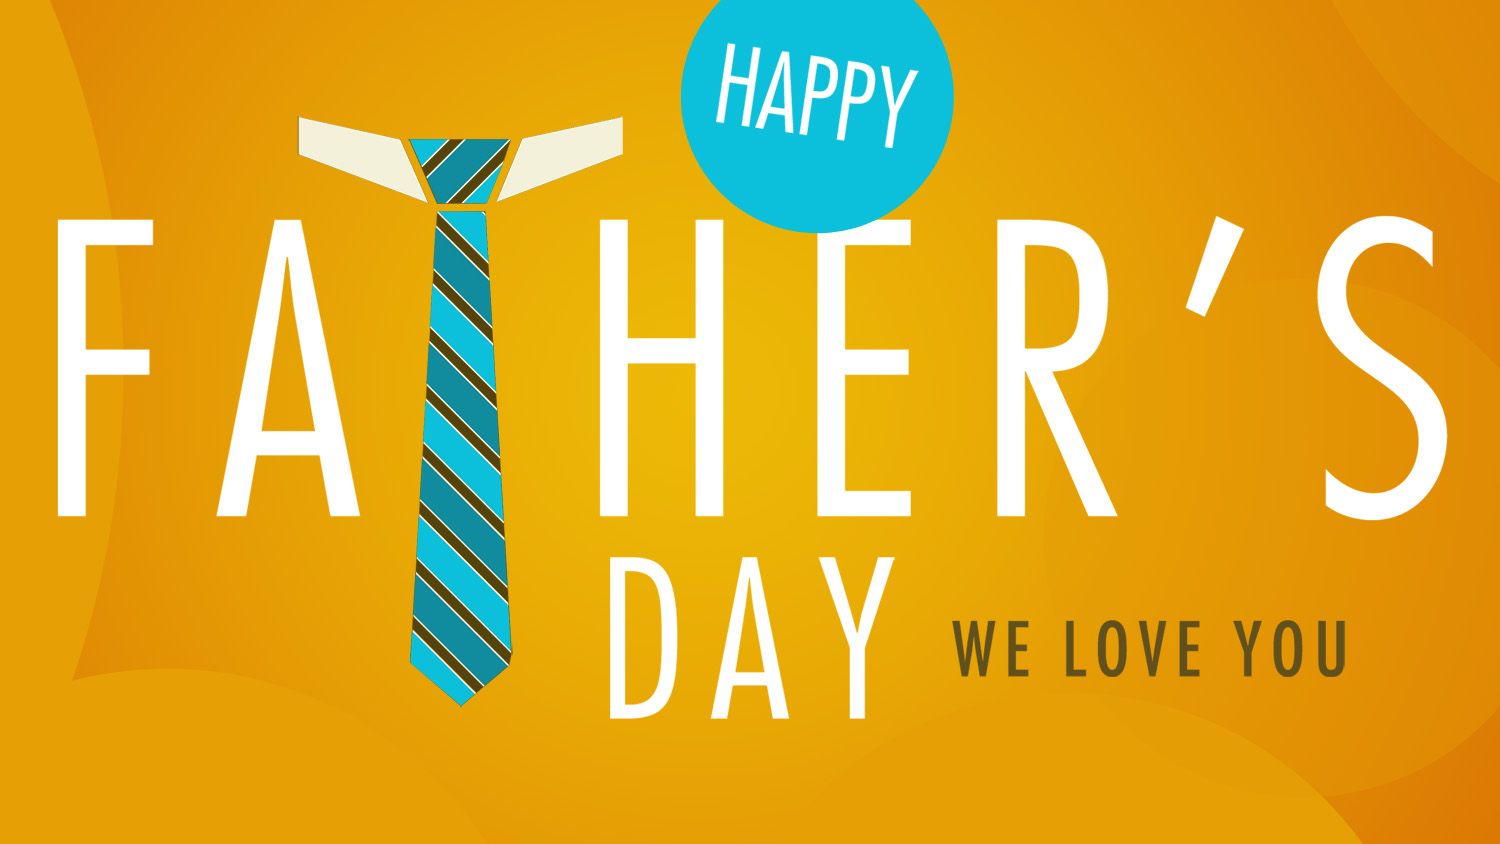 Father's Day Desktop Wallpapers | One HD Wallpaper Pictures ...